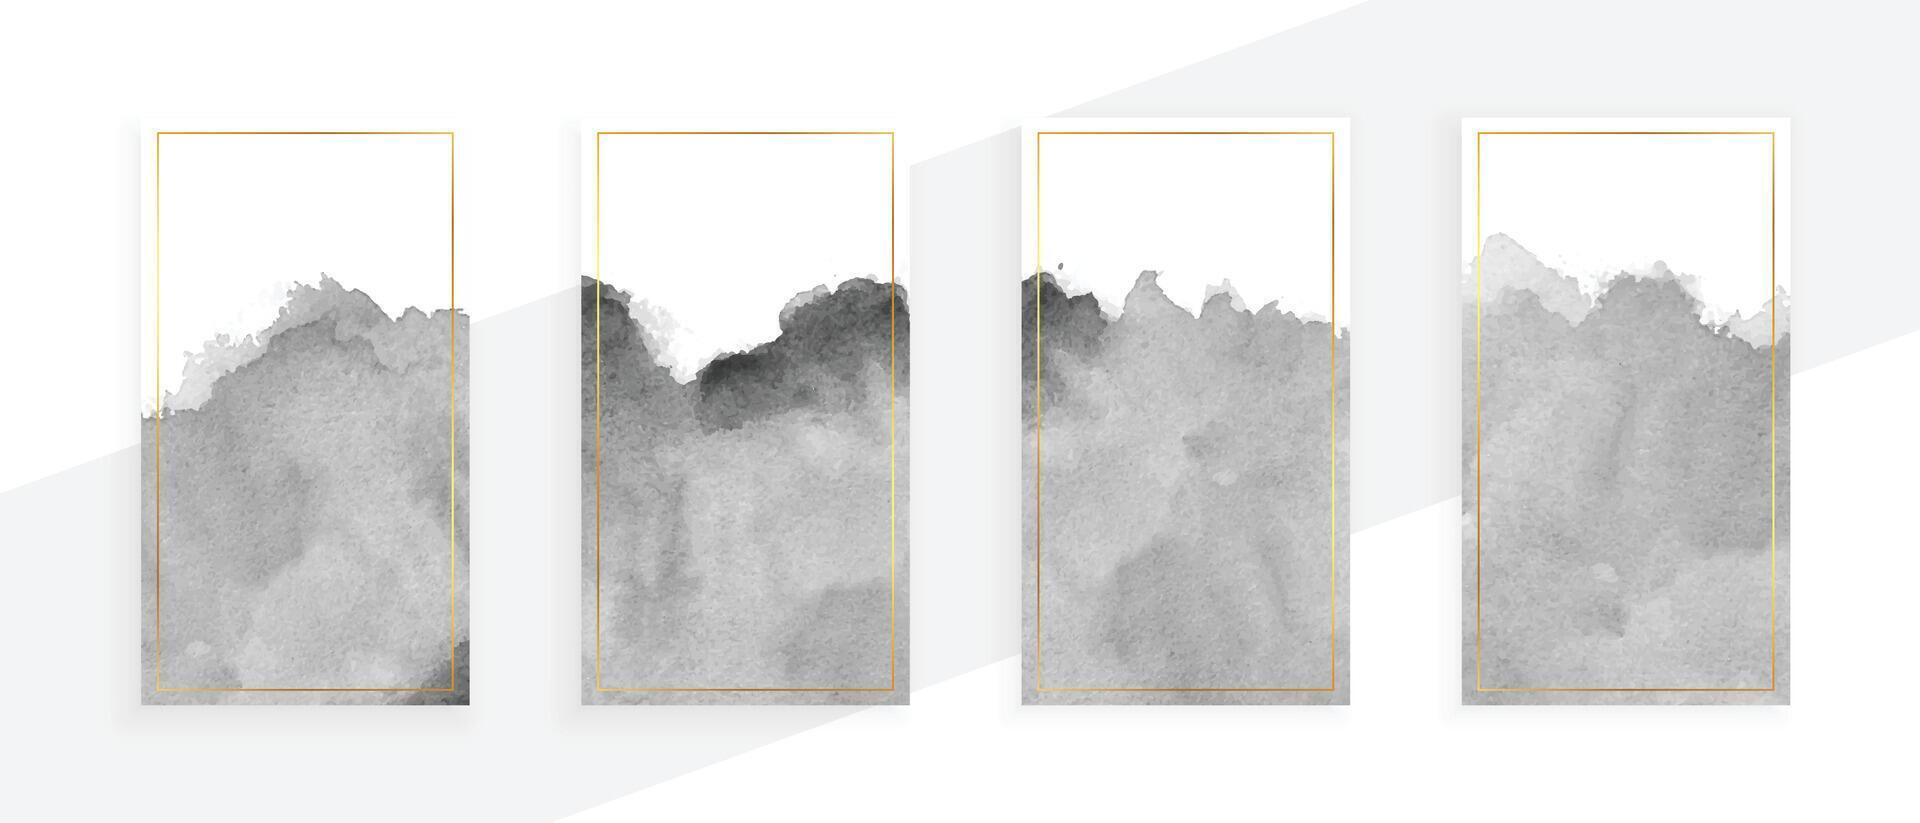 gray watercolor banners set of four vector